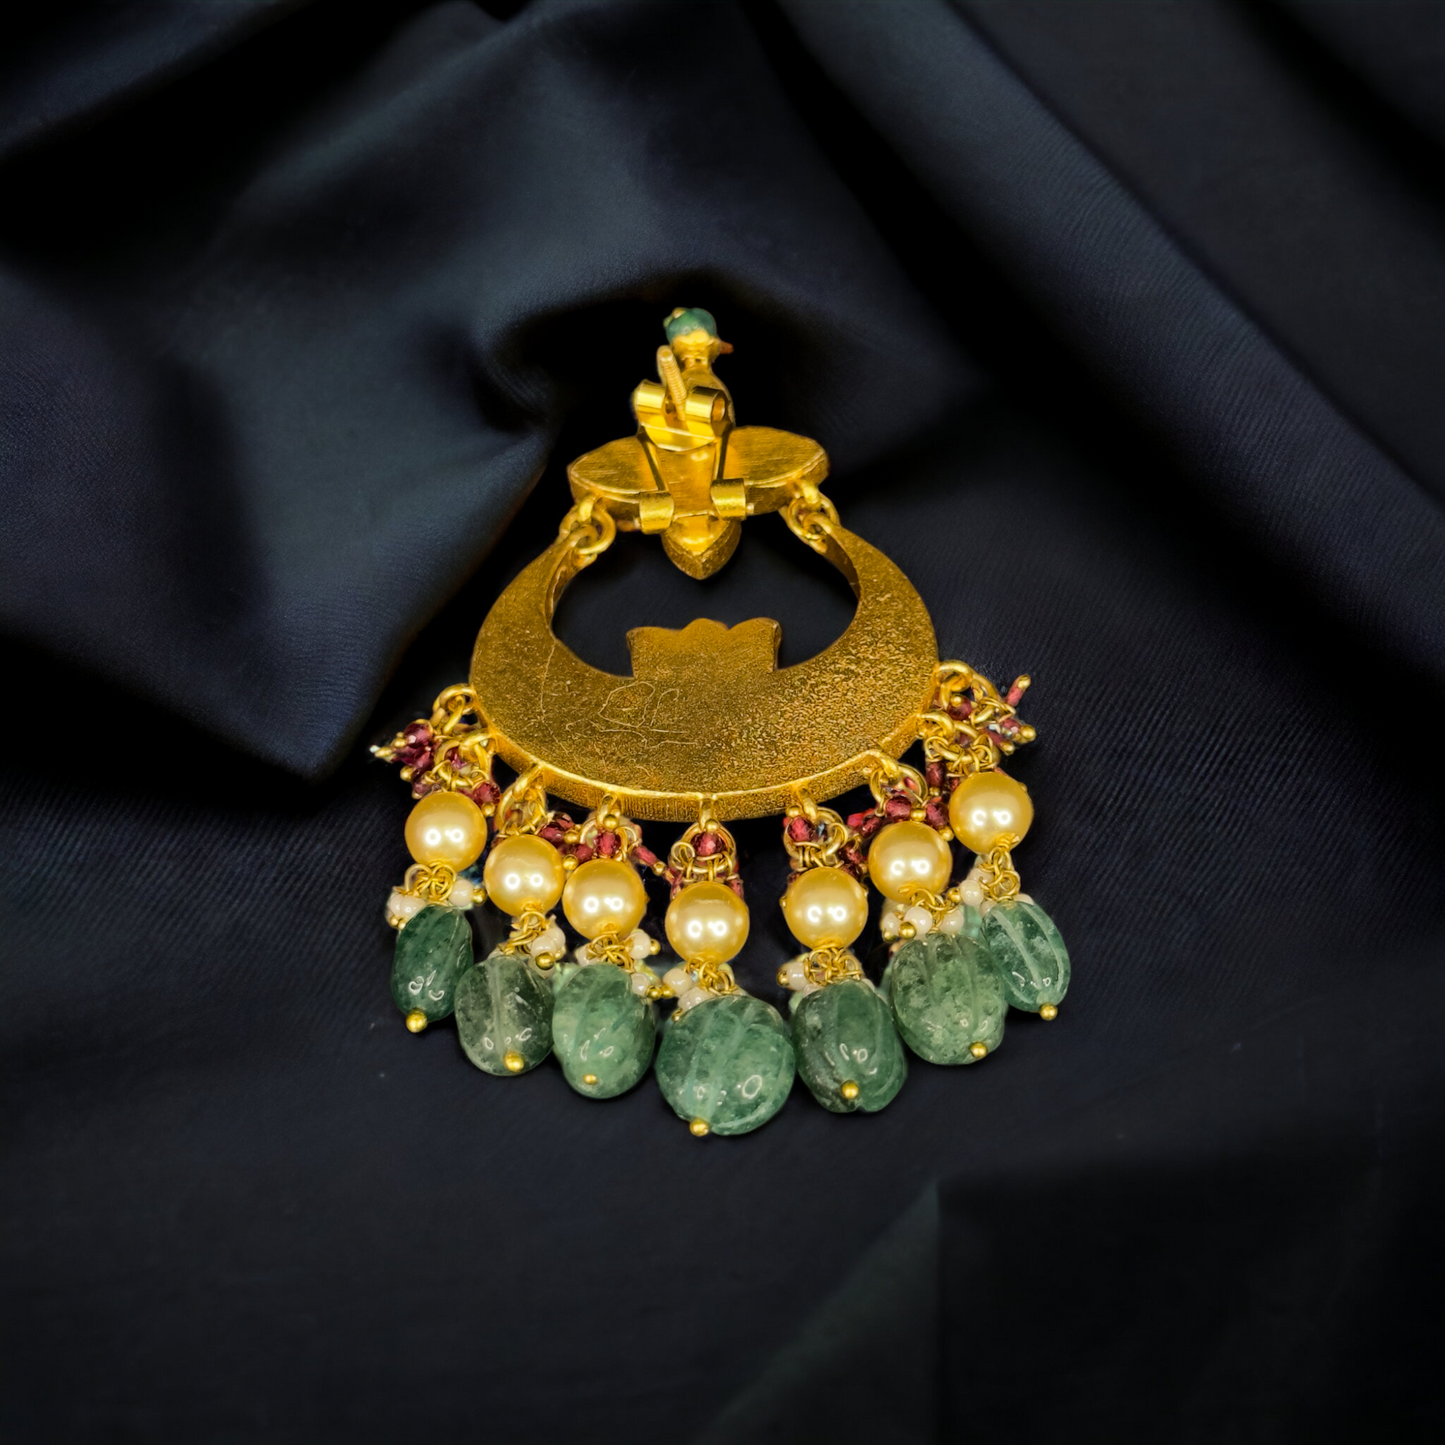 Gold Plated Chandbali Earrings with Beads & Pearls